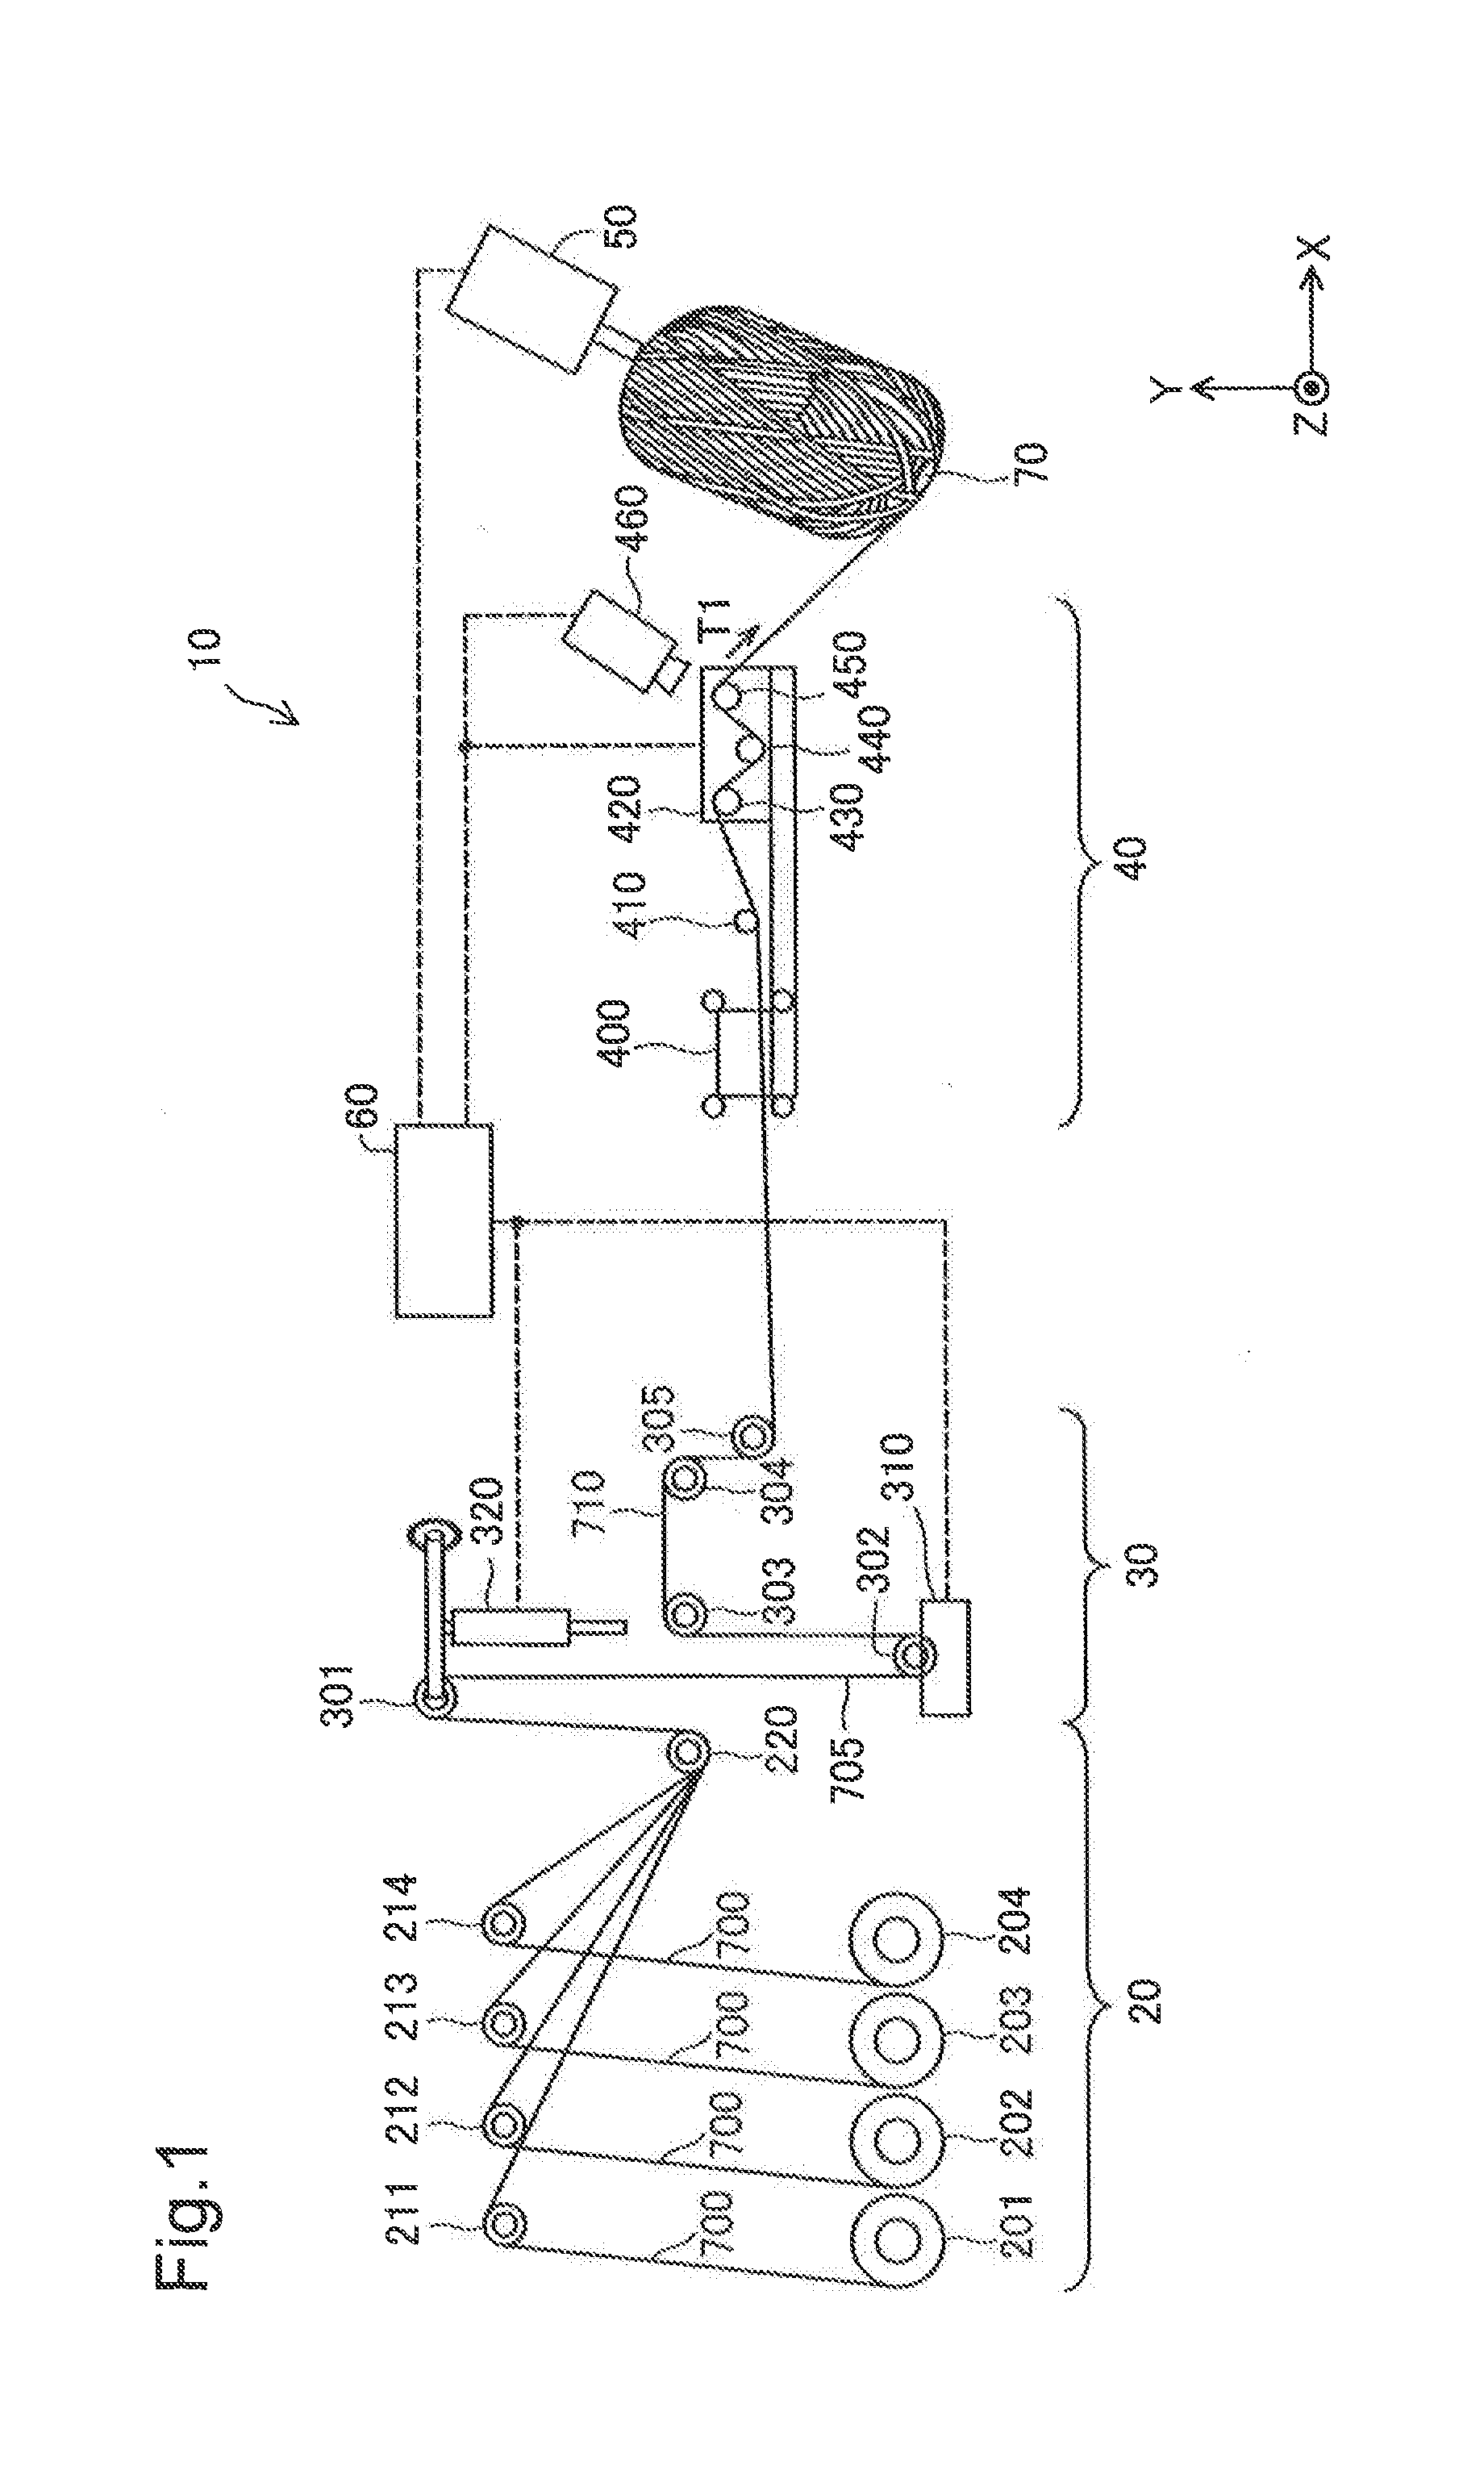 Filament winding apparatus and method of controlling filament winding apparatus